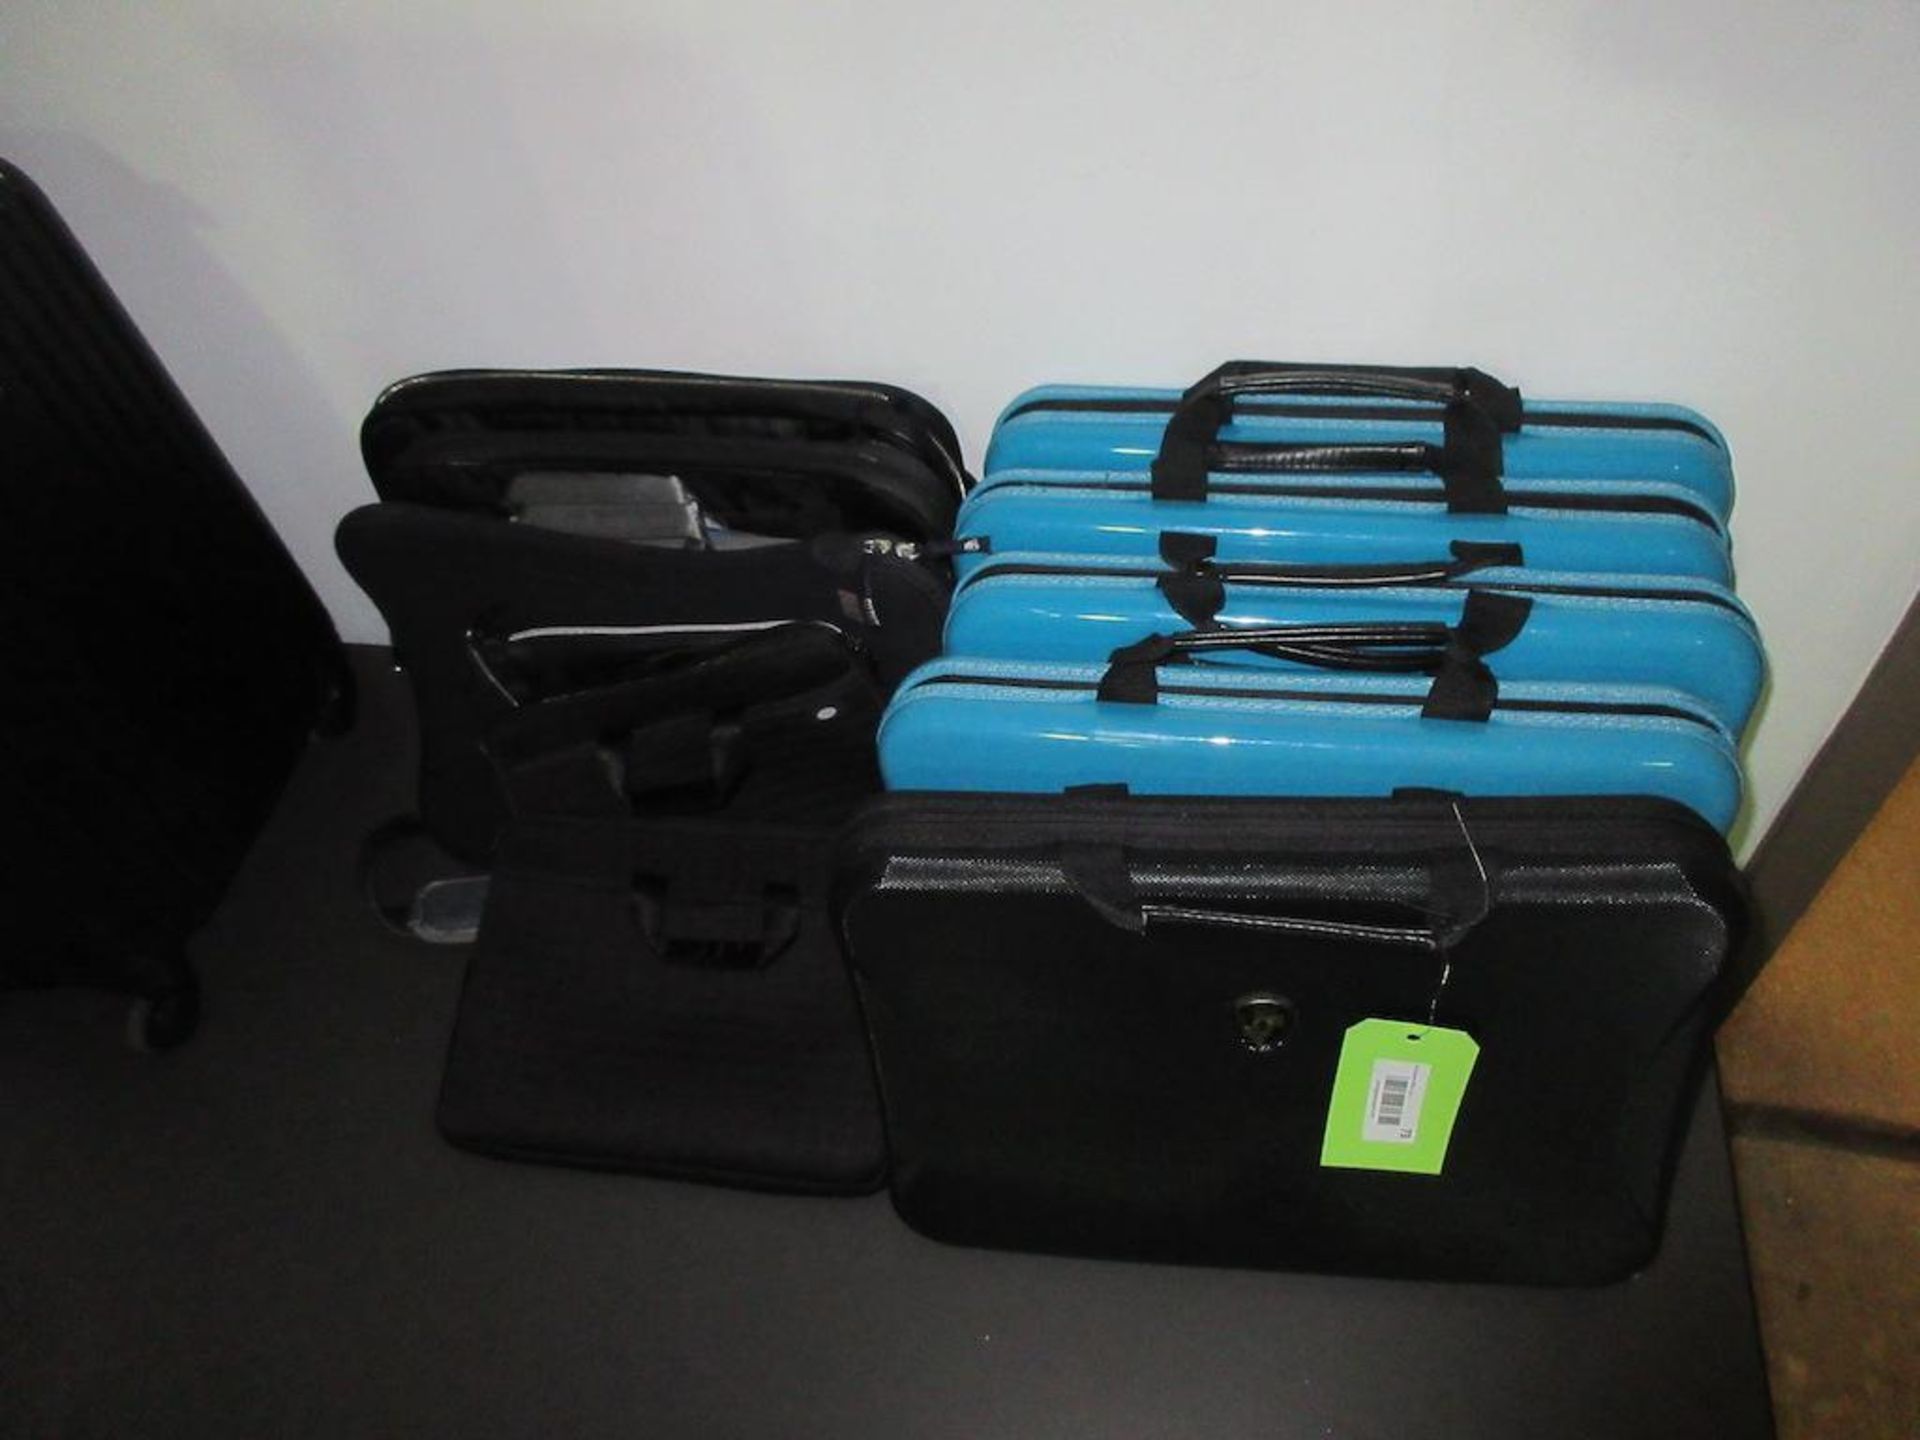 (5) HEYS X SLEEVE LAPTOP CASES, (1) CHAMPS CARRY ON SUITCASE, (6) ASST LAPTOP BAGS - Image 3 of 3